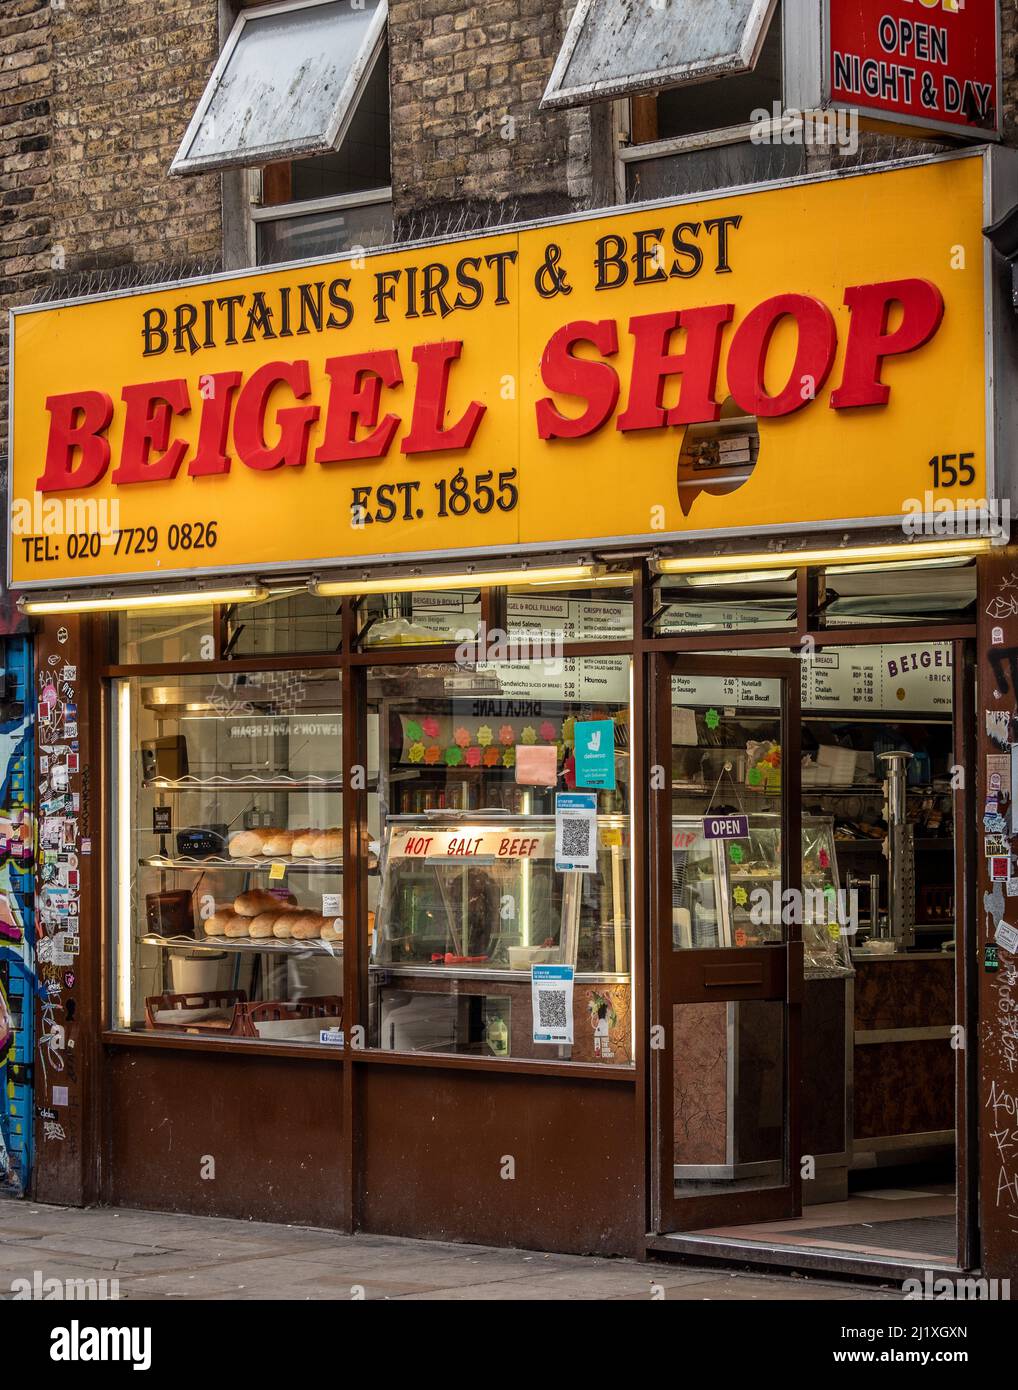 Britain's first and best Beigel Shop exterior facade with yellow and red sign in Brick Lane. London. UK Stock Photo